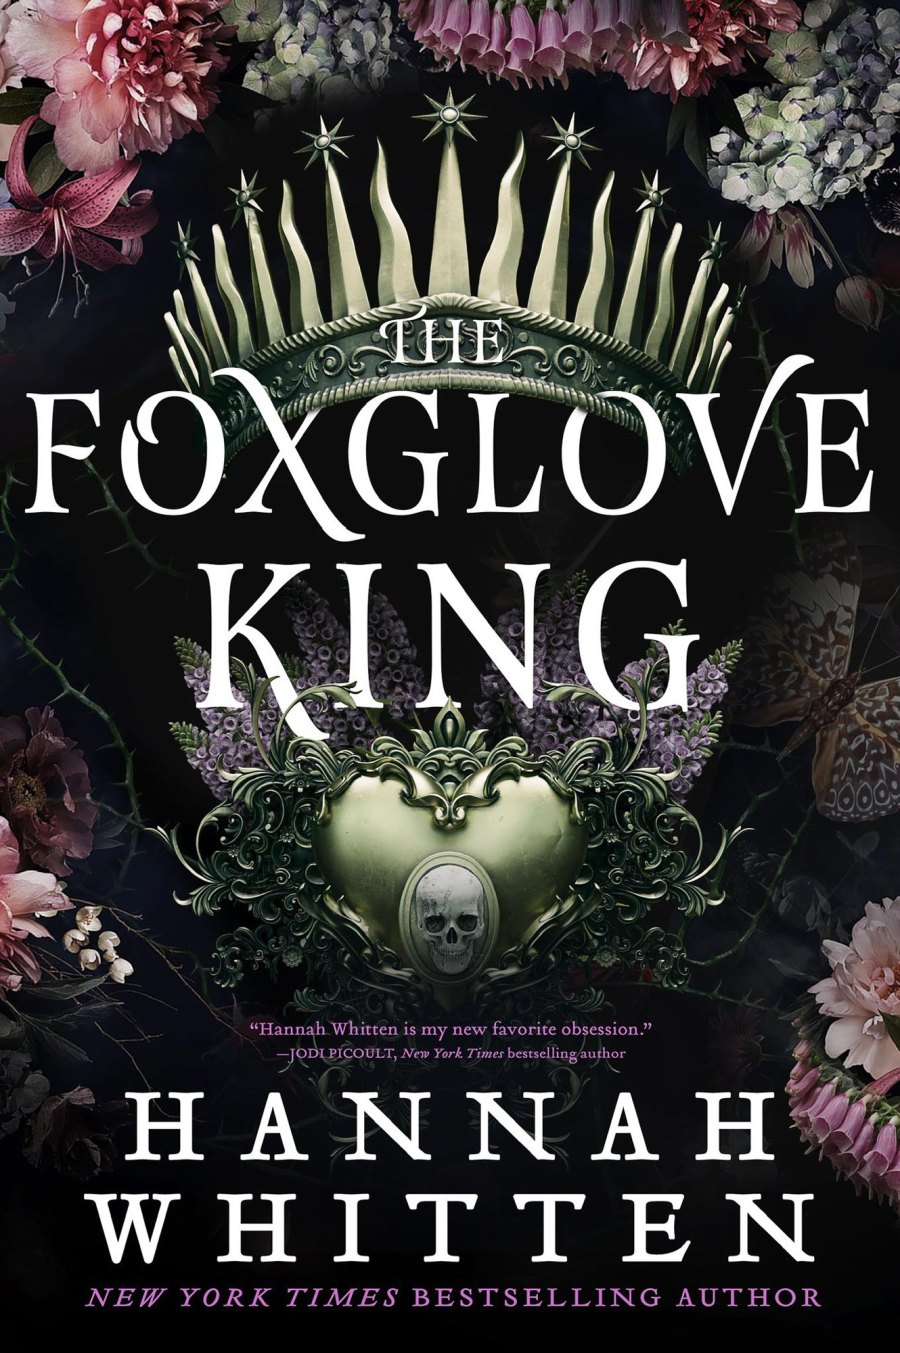 If You re a Fan of Sarah J Maas You Need to Read These Romantasy Books ASAP The Foxglove King by Hannah Whitten 063